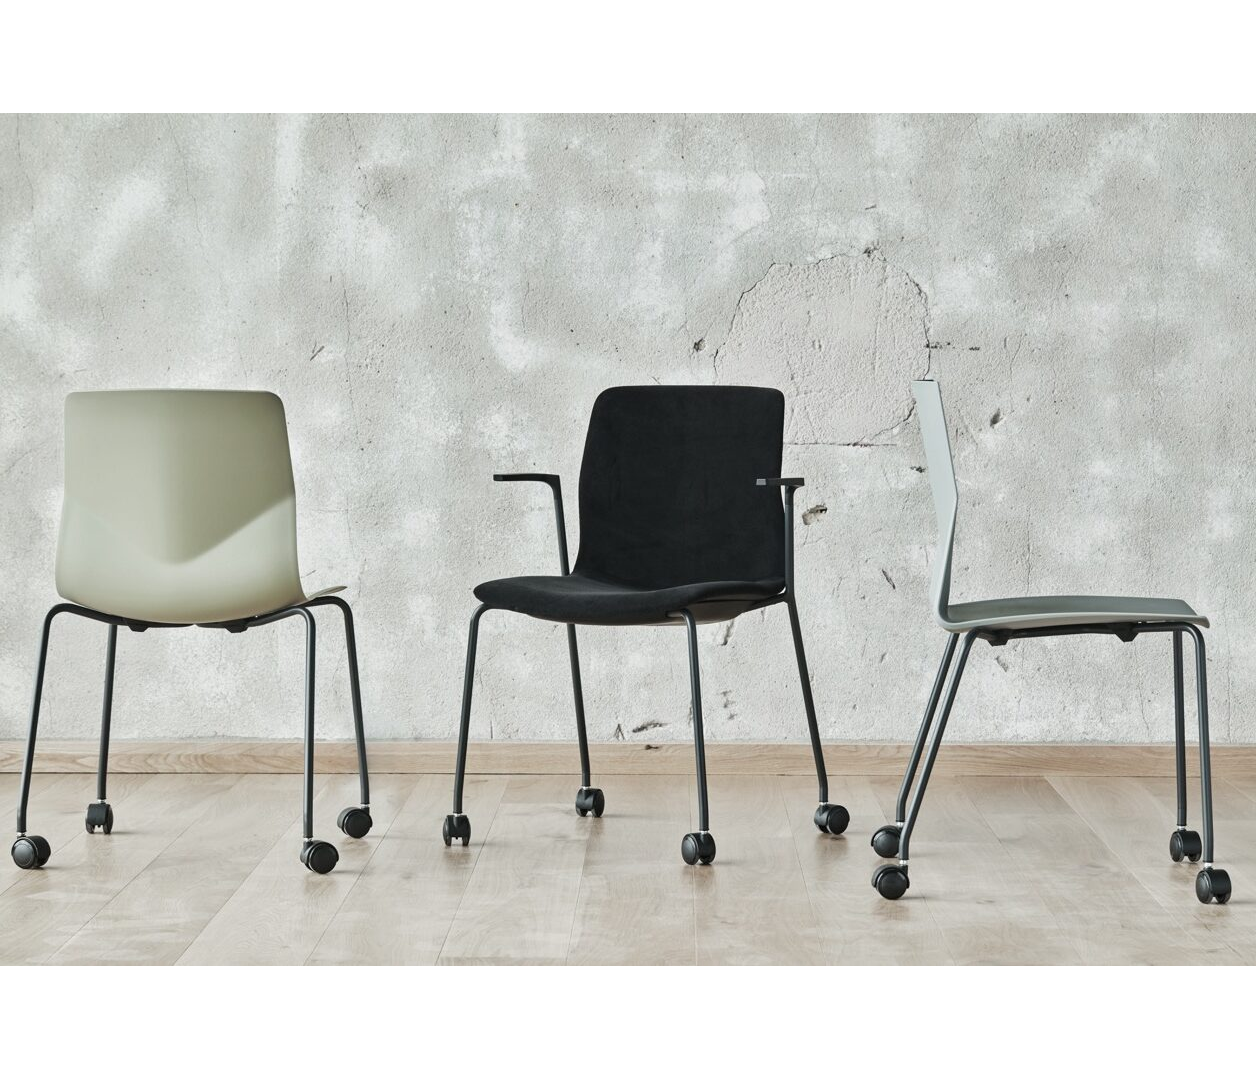 OCEE&FOUR – Chairs – FourSure 77 – Lifestyle Image 1 Large